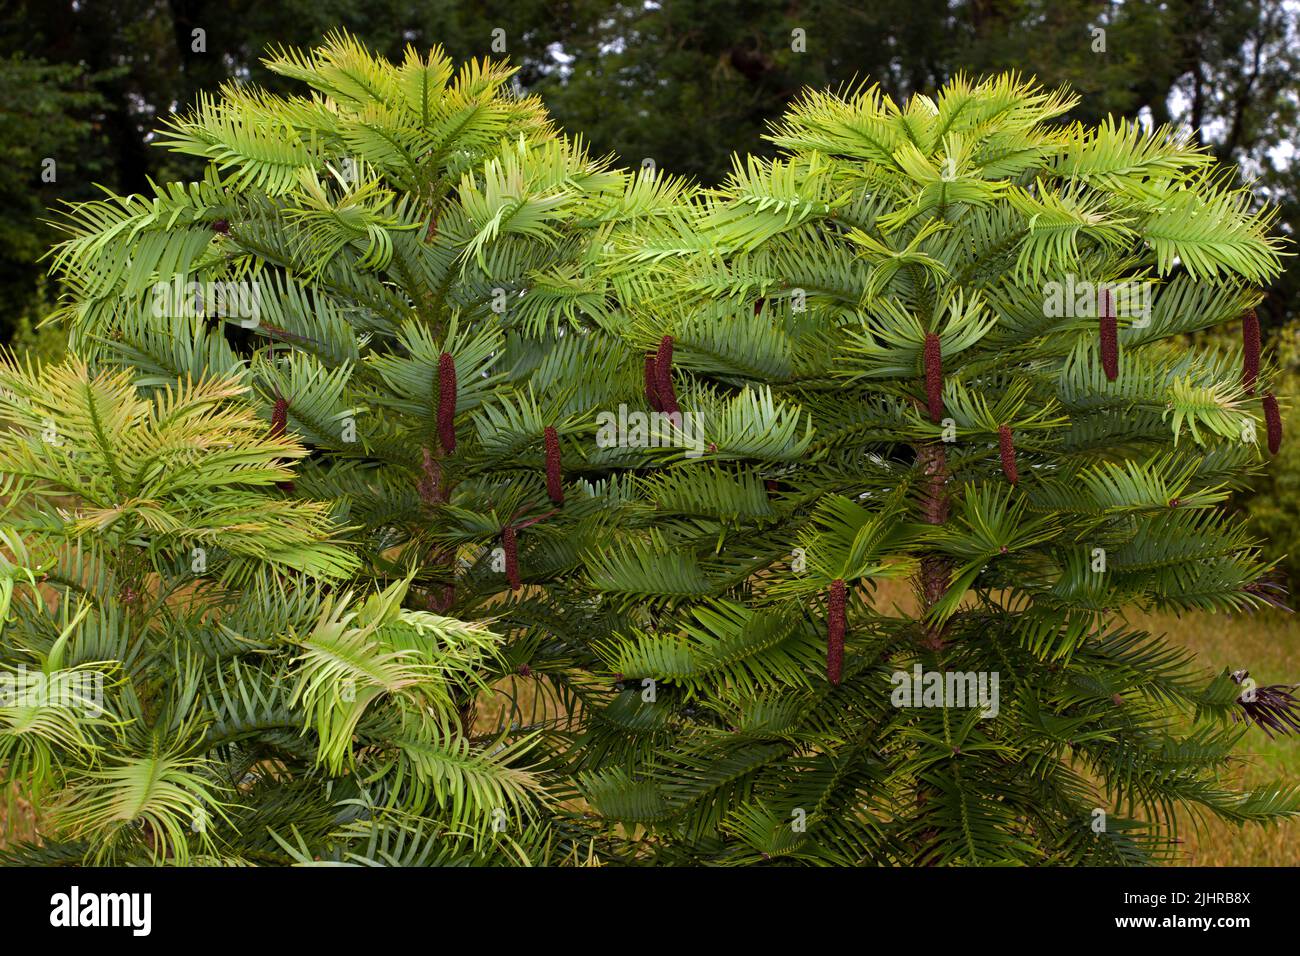 Wollemia nobilis (Wollemi pine) was known only from fossils until a living plant was discovered in the temperate rainforests of Australia. Stock Photo